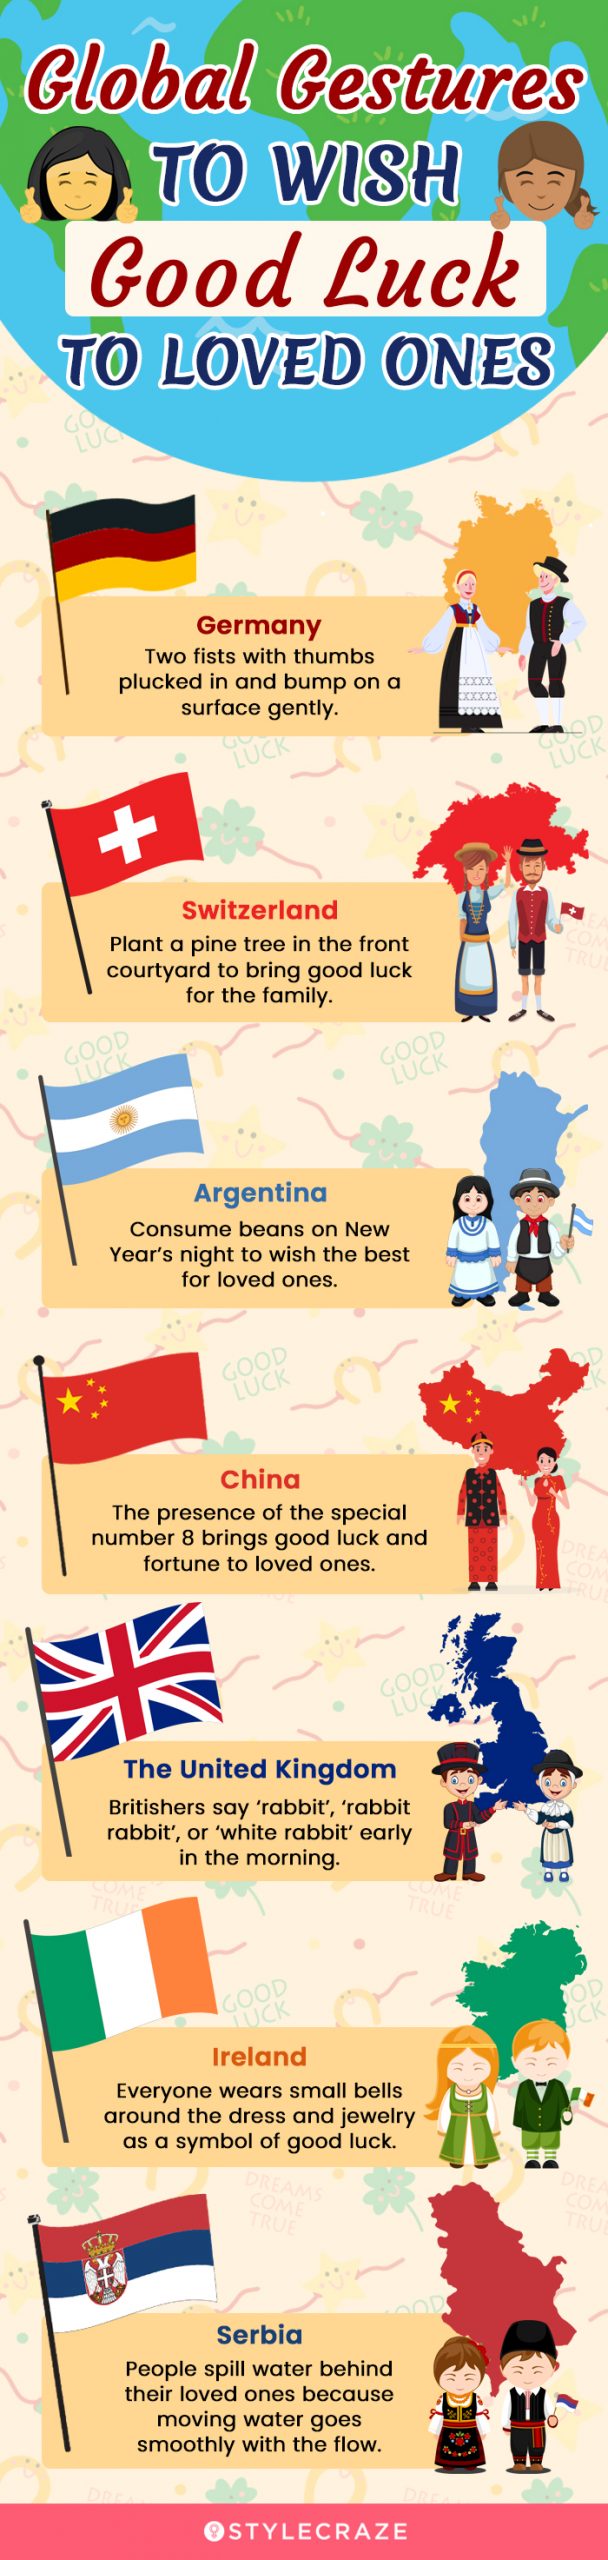 global gestures to wish good luck to loved ones (infographic)